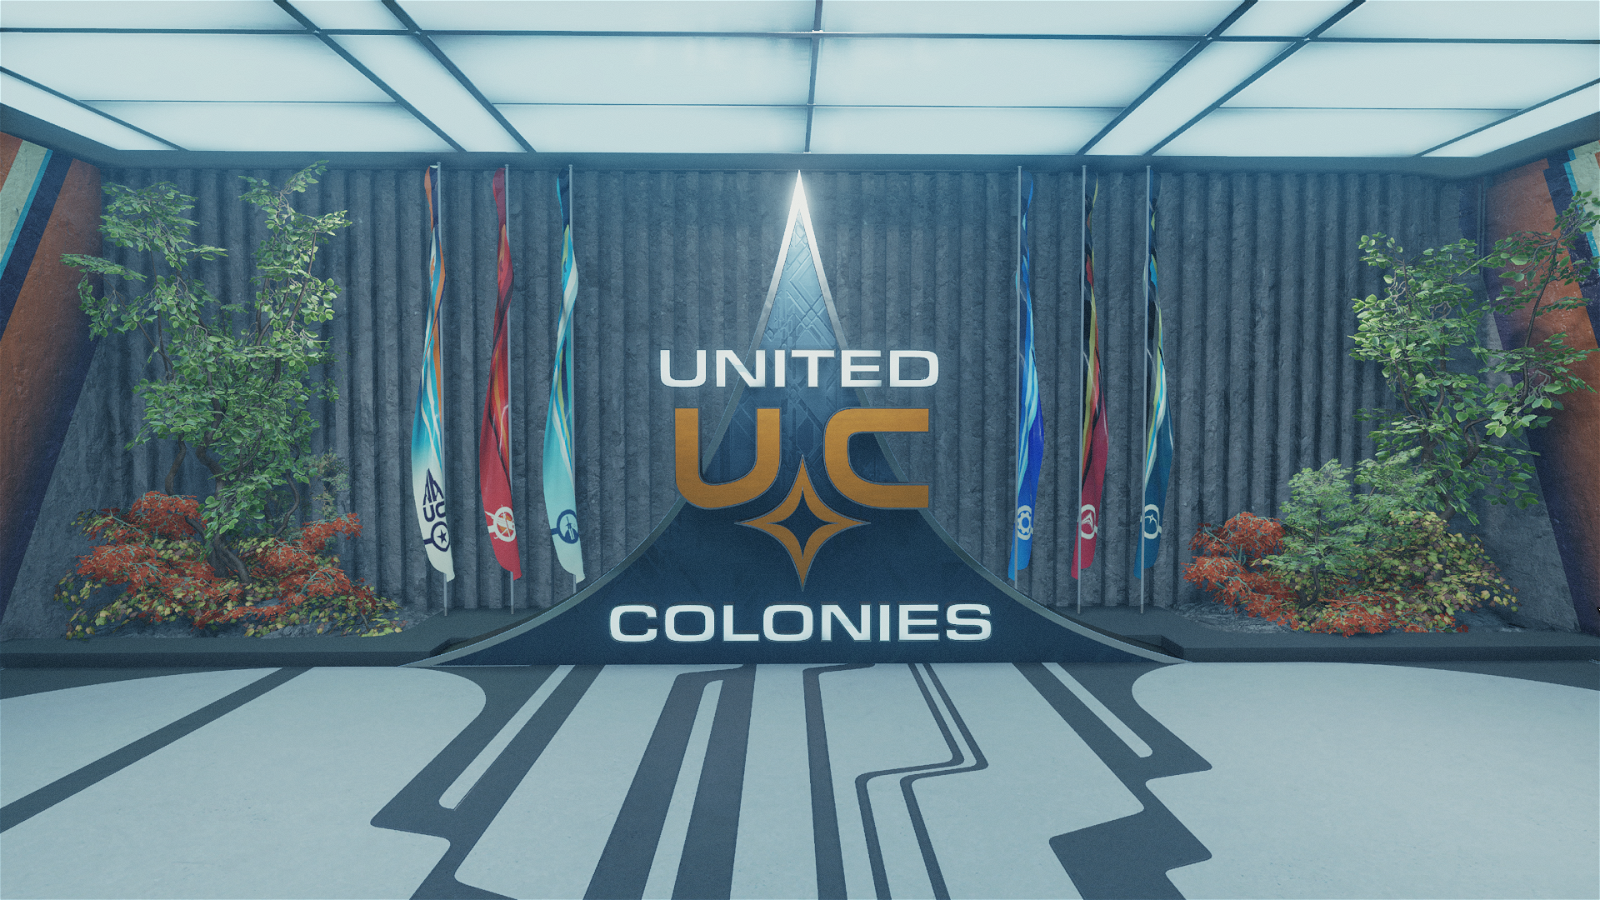 United Colonies Faction in Starfield